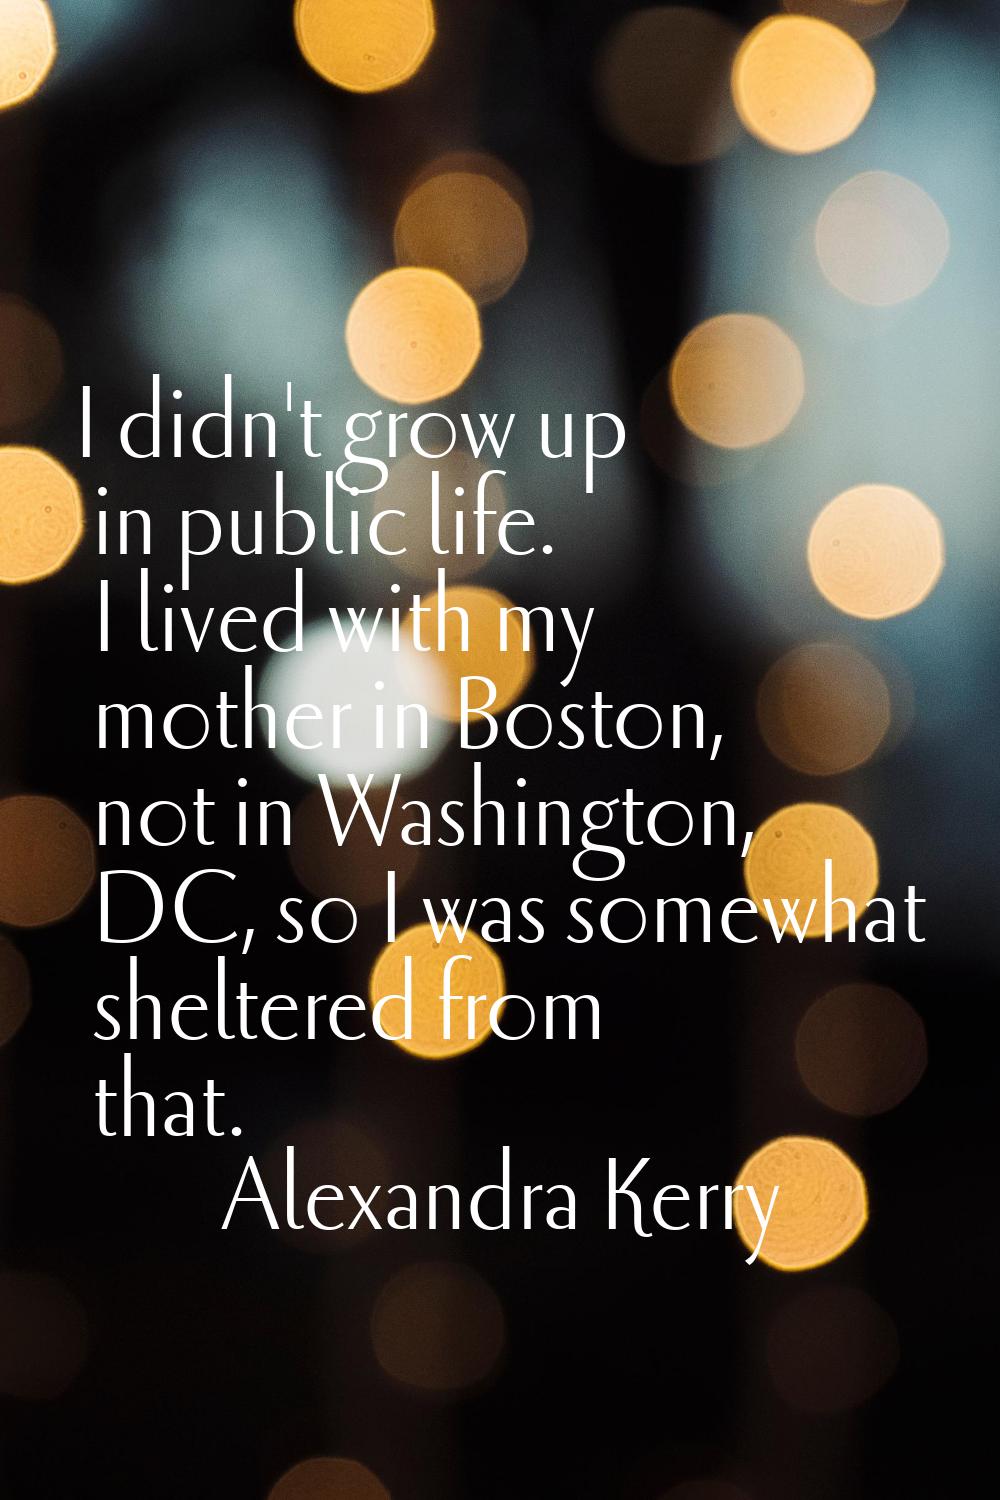 I didn't grow up in public life. I lived with my mother in Boston, not in Washington, DC, so I was 